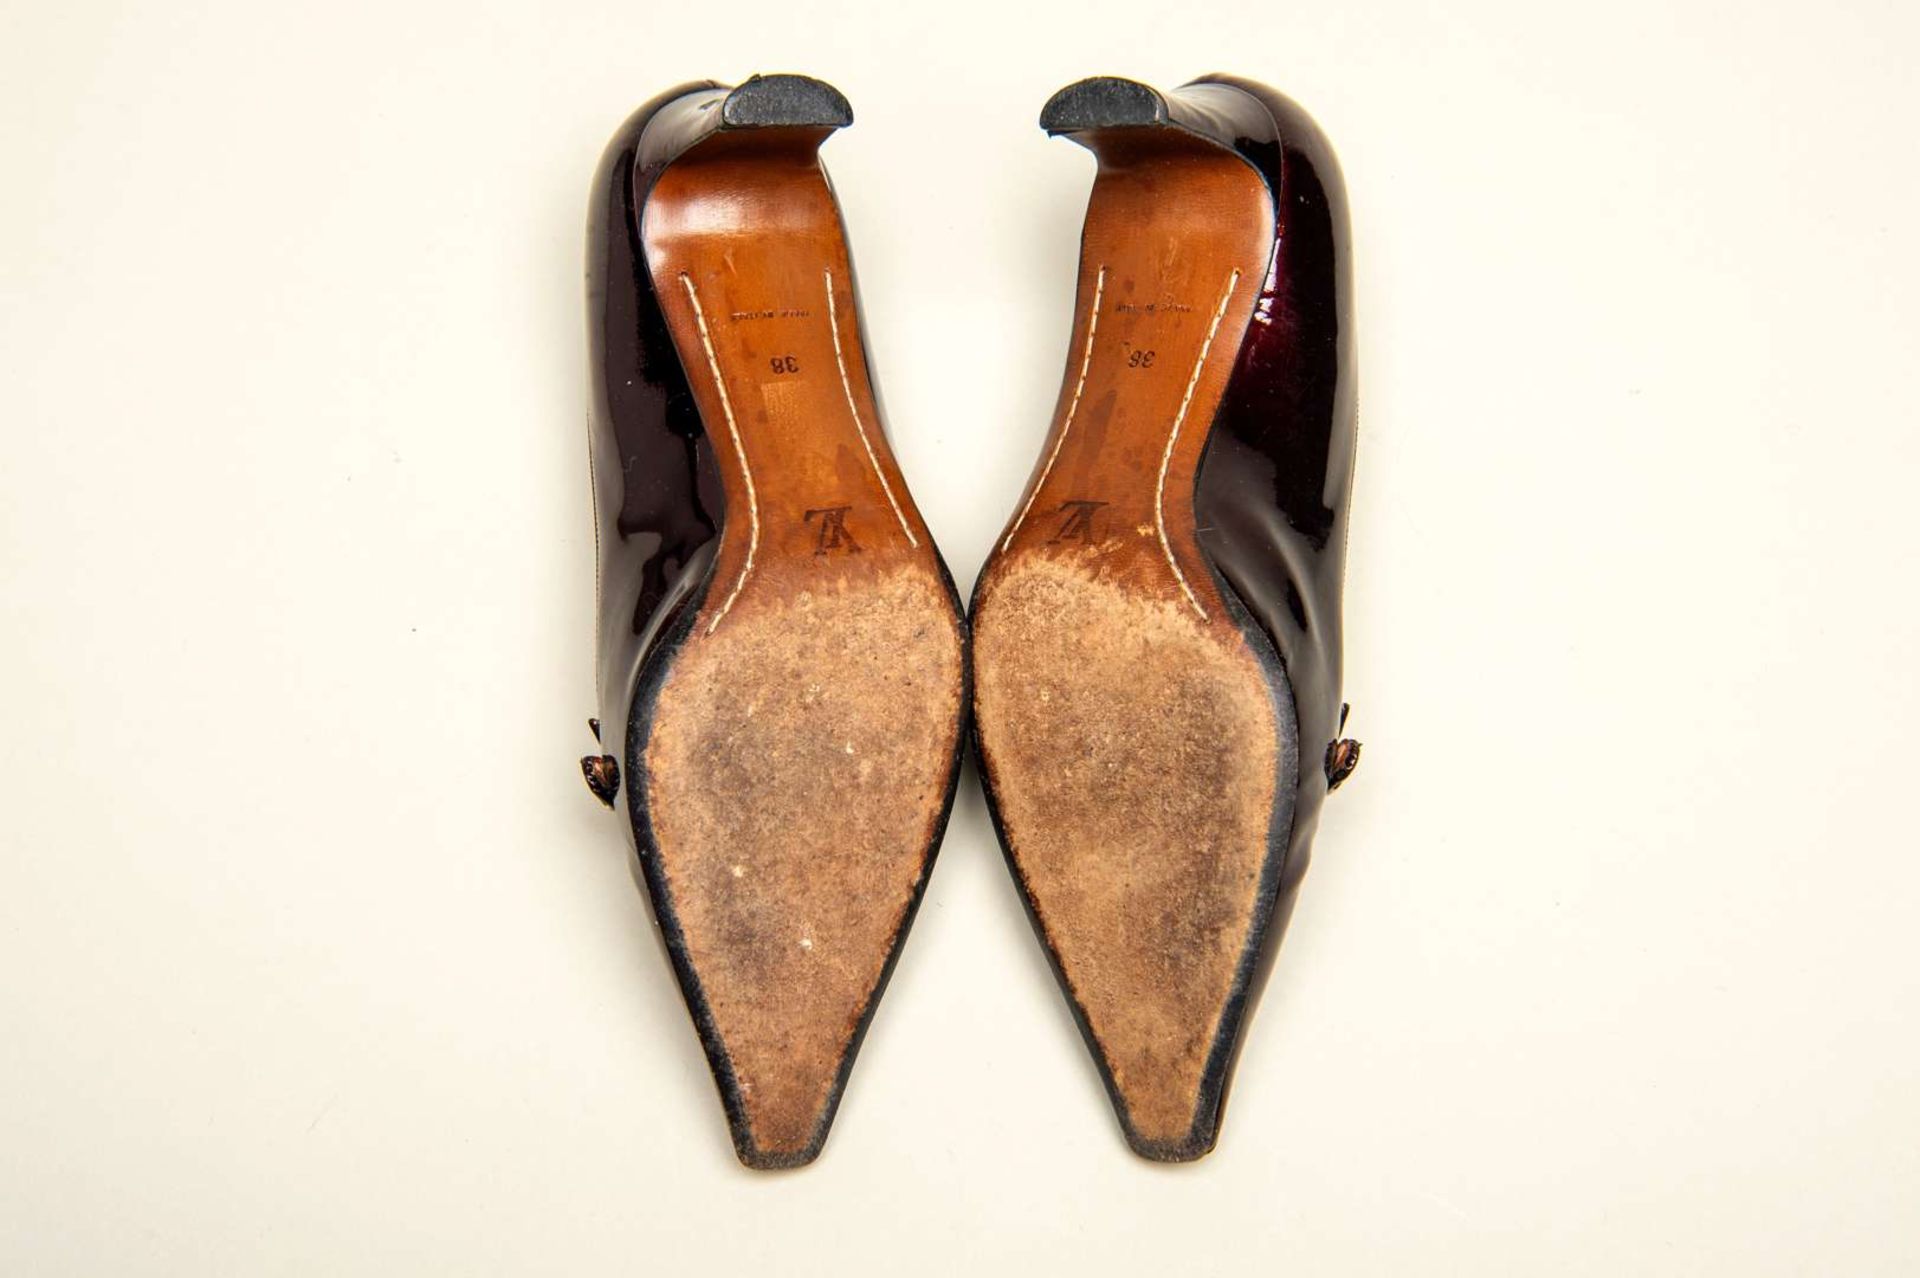 LOUIS VUITTON, a pair of dark bronze, patent leather pumps - Image 6 of 6